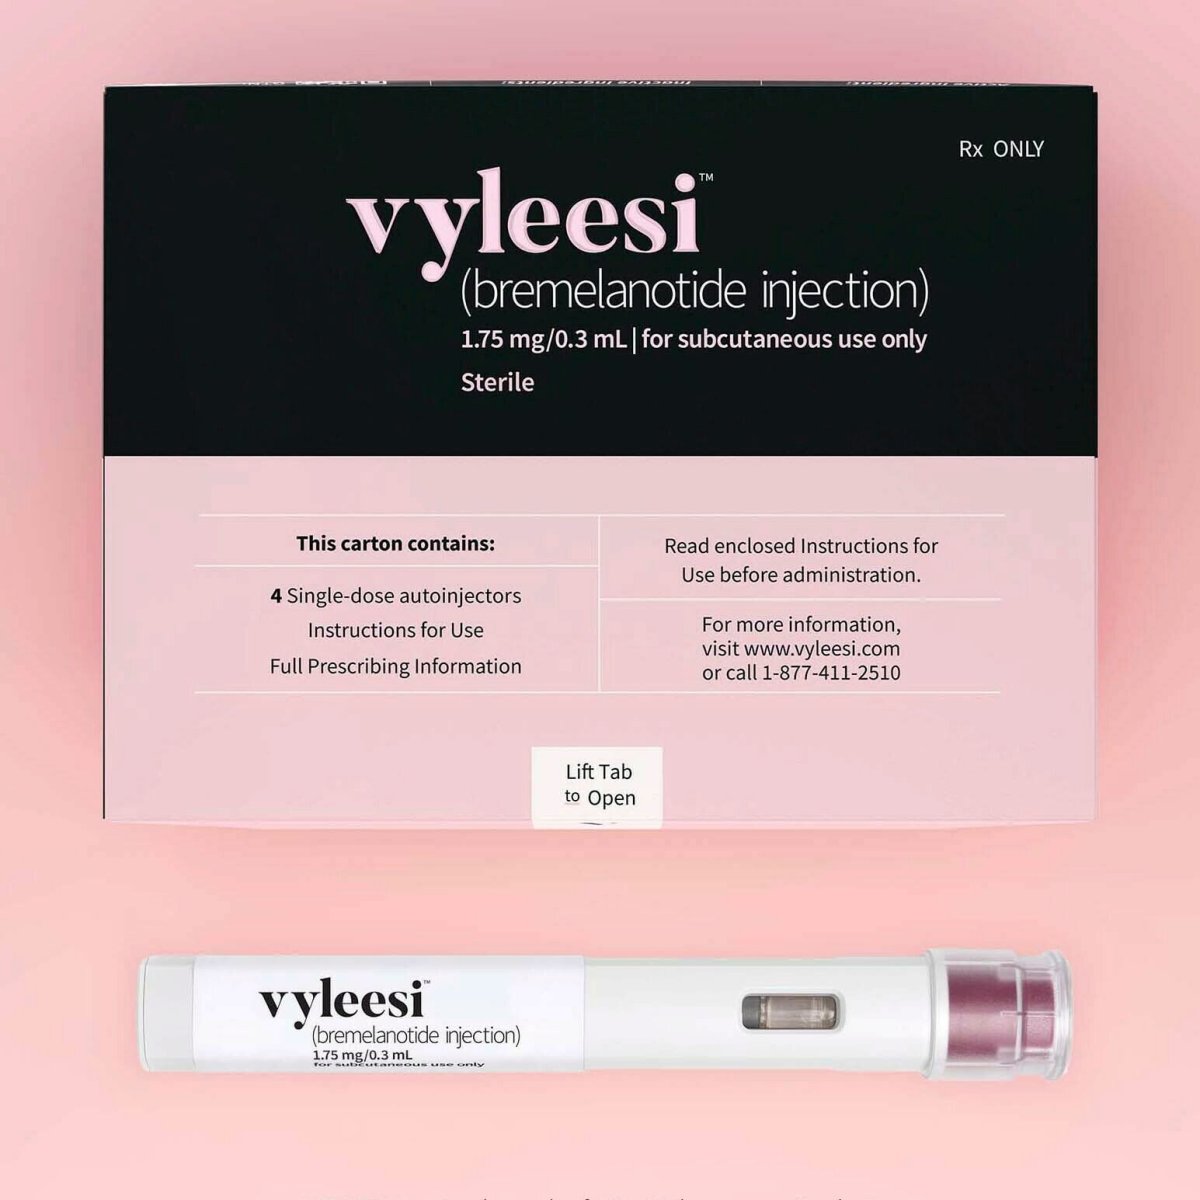 This image provided by Amag Pharmaceuticals in June 2019 shows packaging for their drug Vyleesi.